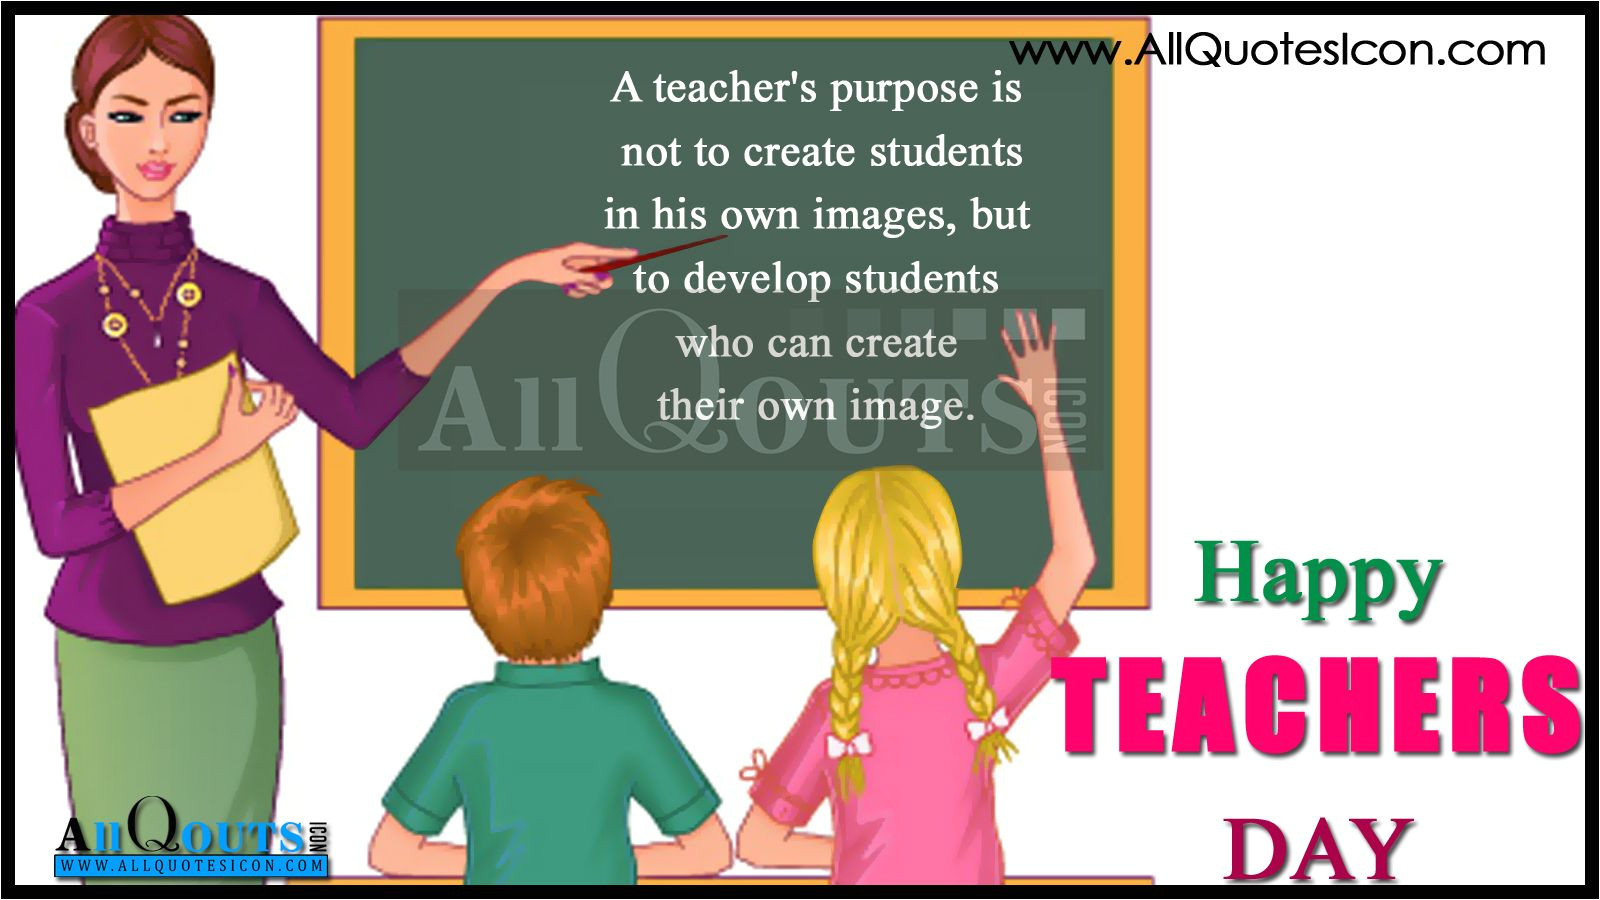 Beautiful Card for Your Teacher 33 Teacher Day Messages to Honor Our Teachers From Students